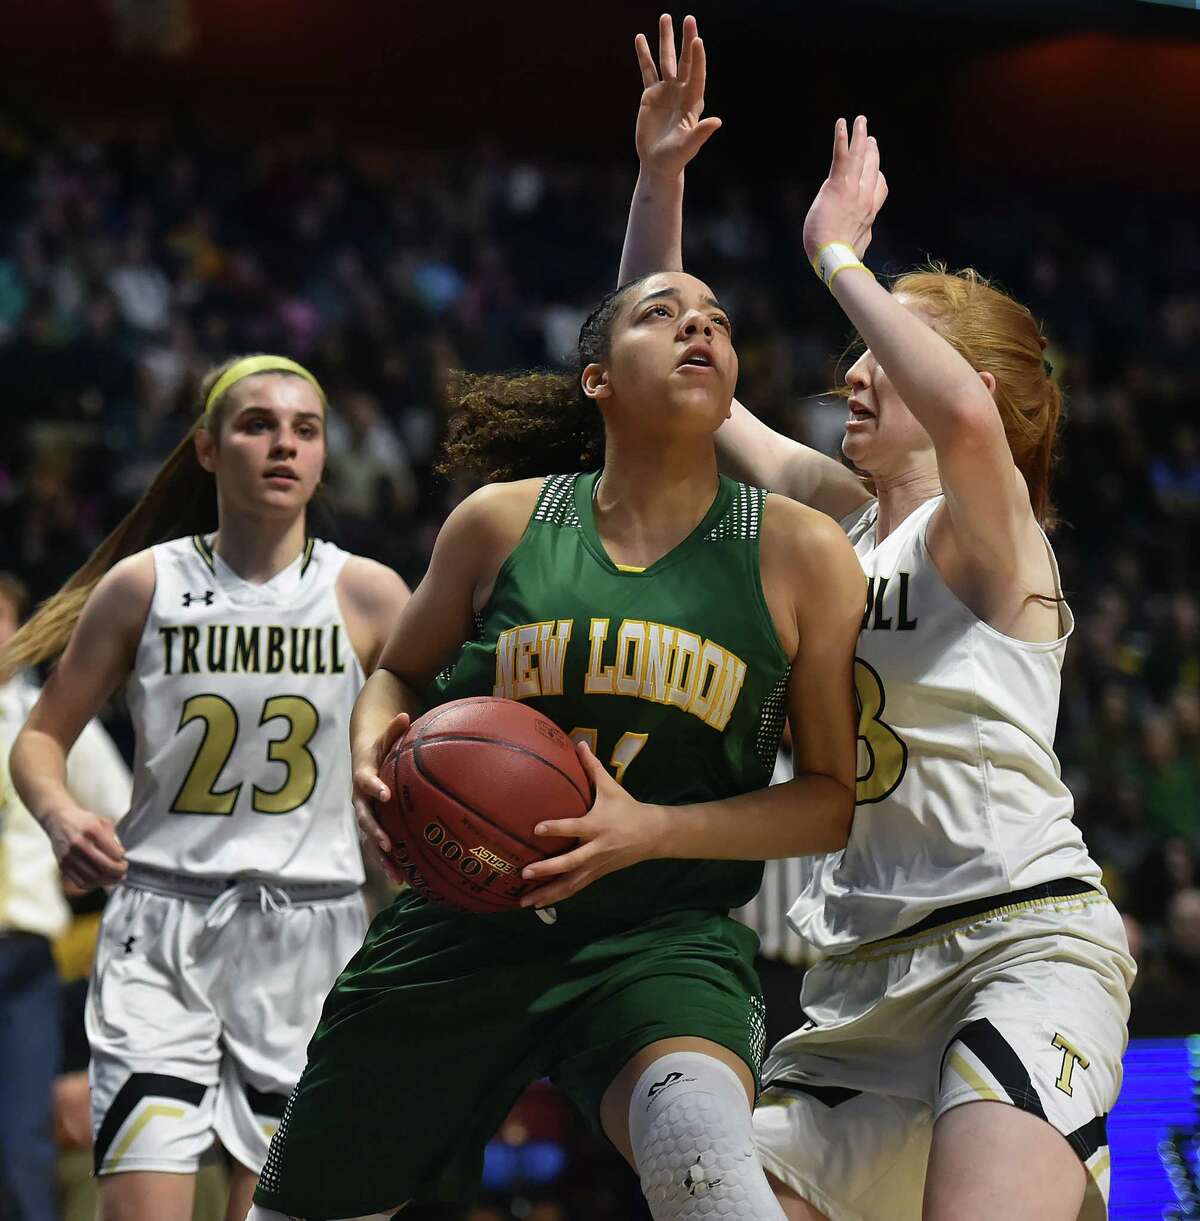 New London defeats Trumbull, 42-36, in the CIAC Class L basketball state championship, Saturday, March 18, 2017, at Mohegan Sun Arena in Uncasville. (Catherine Avalone/New Haven Register)